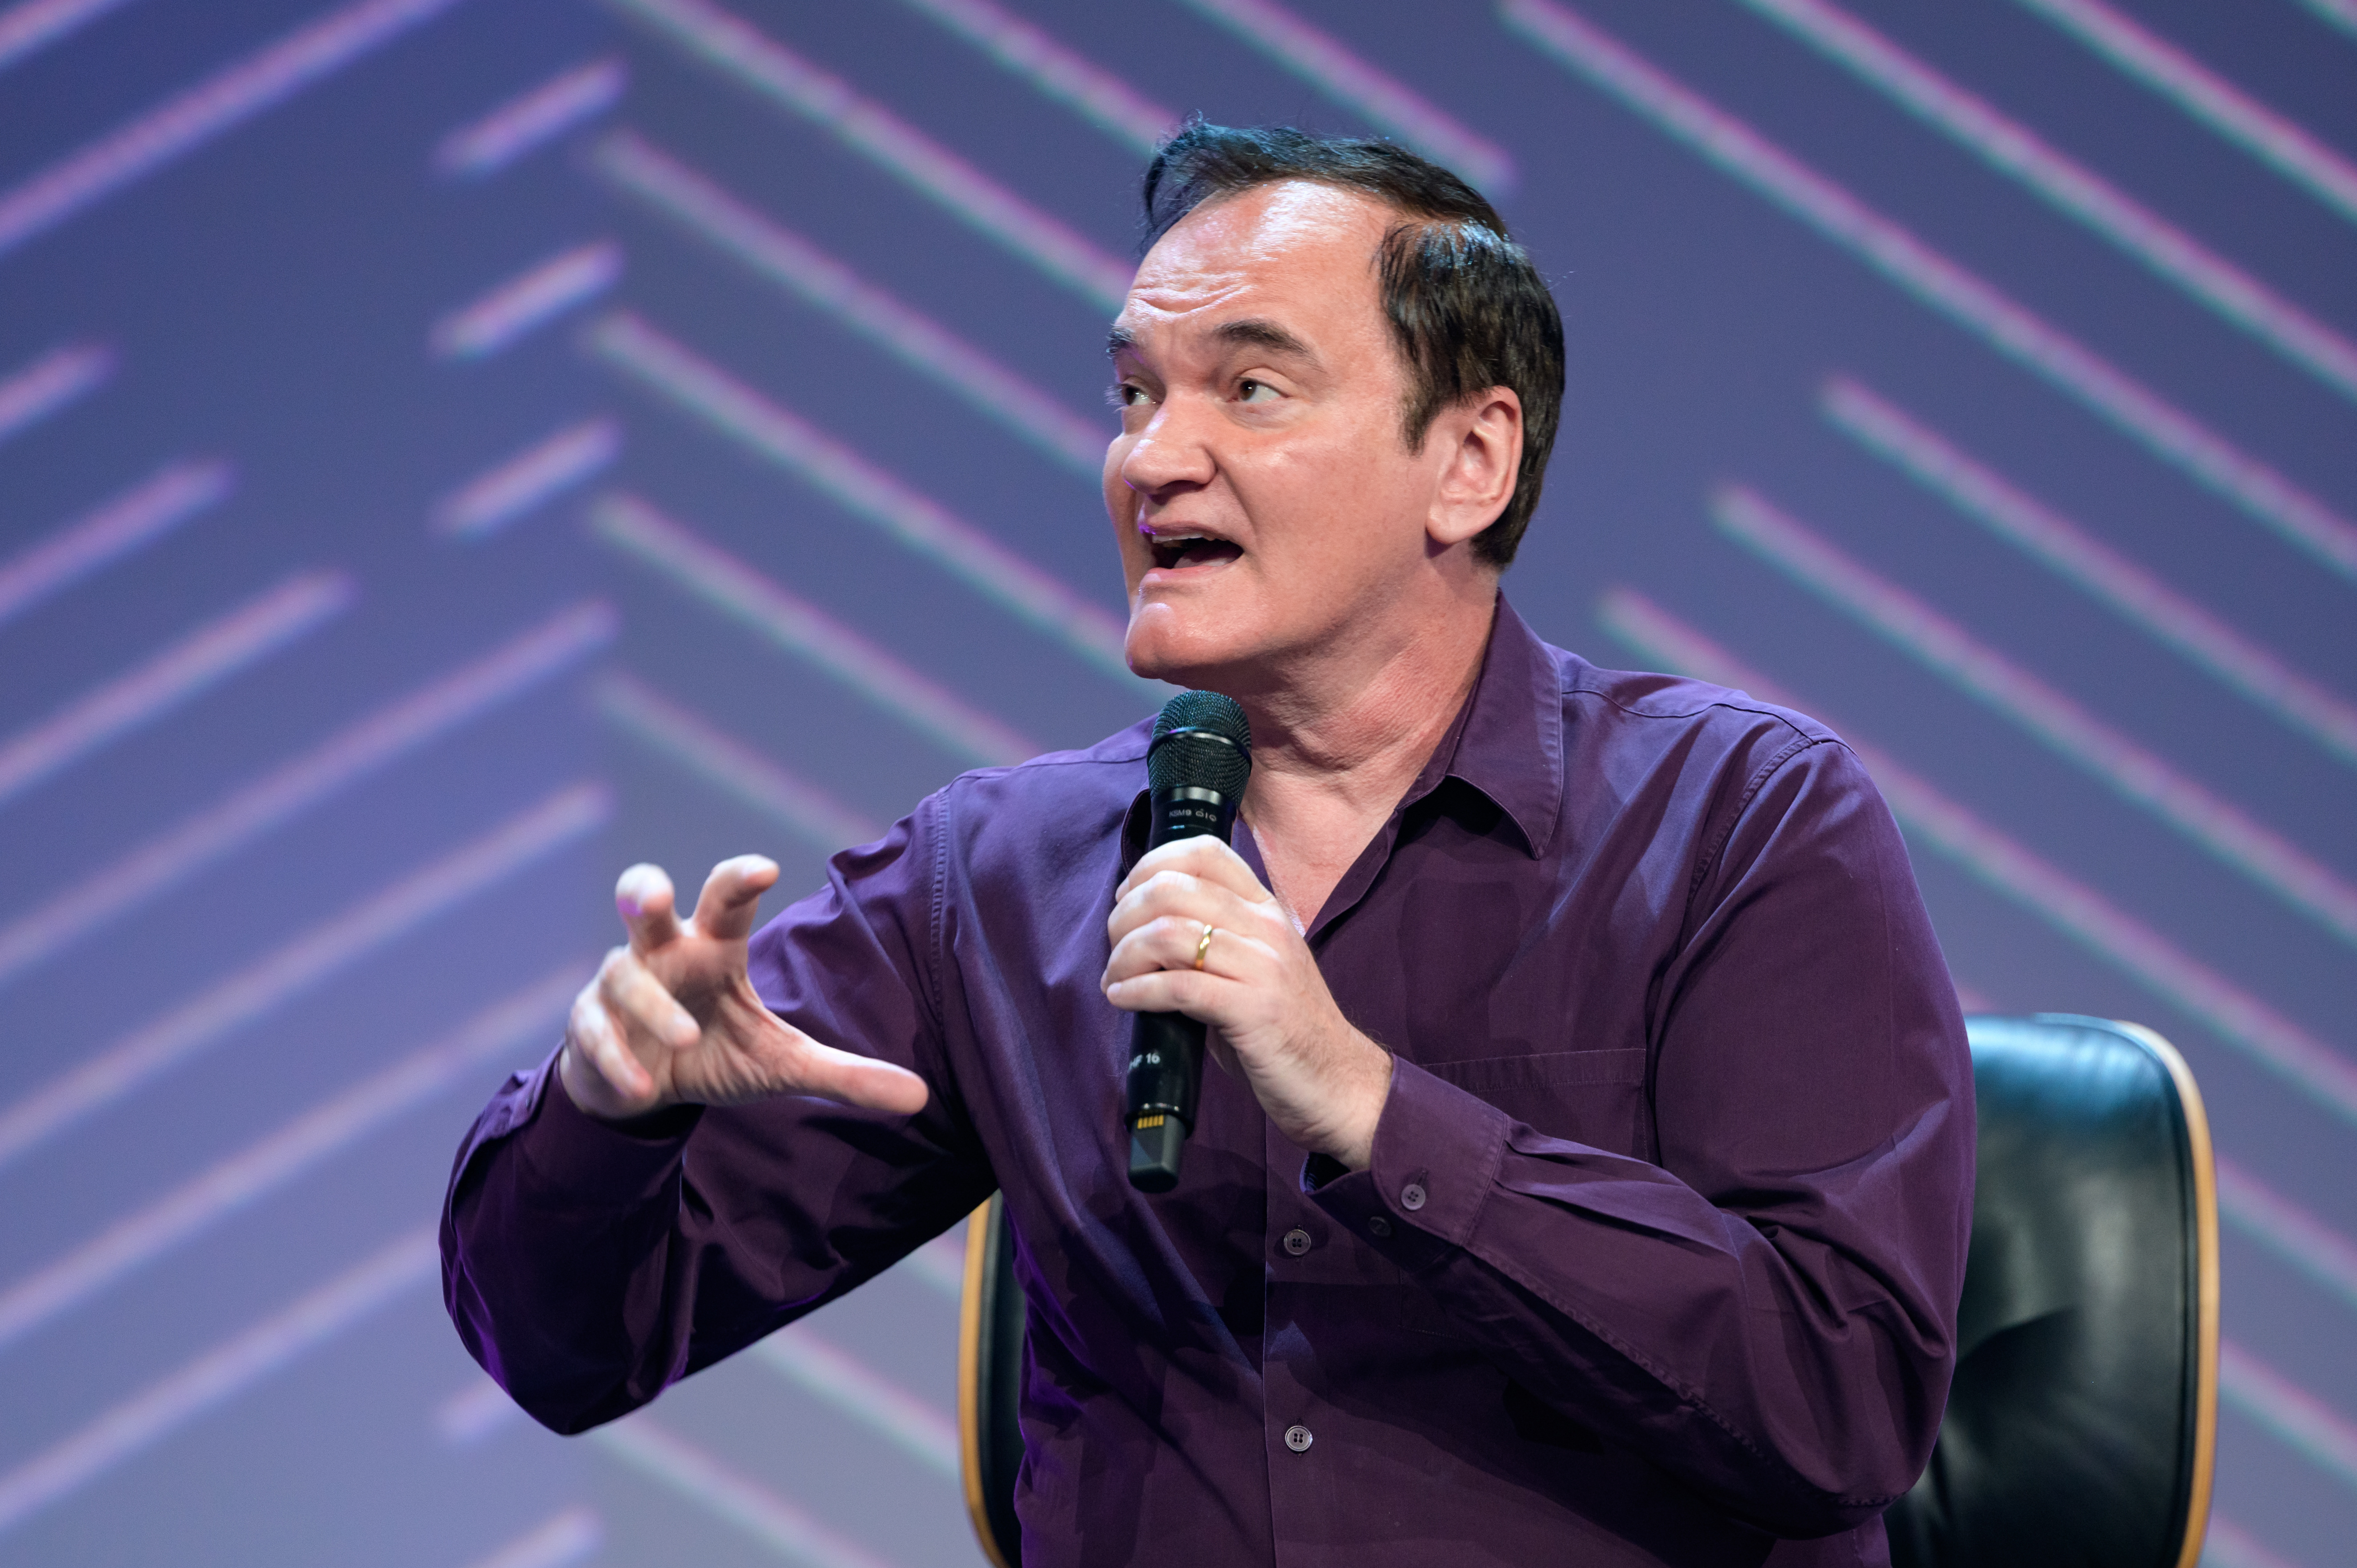 Quentin Tarantino hints at quitting Hollywood, might not direct movies